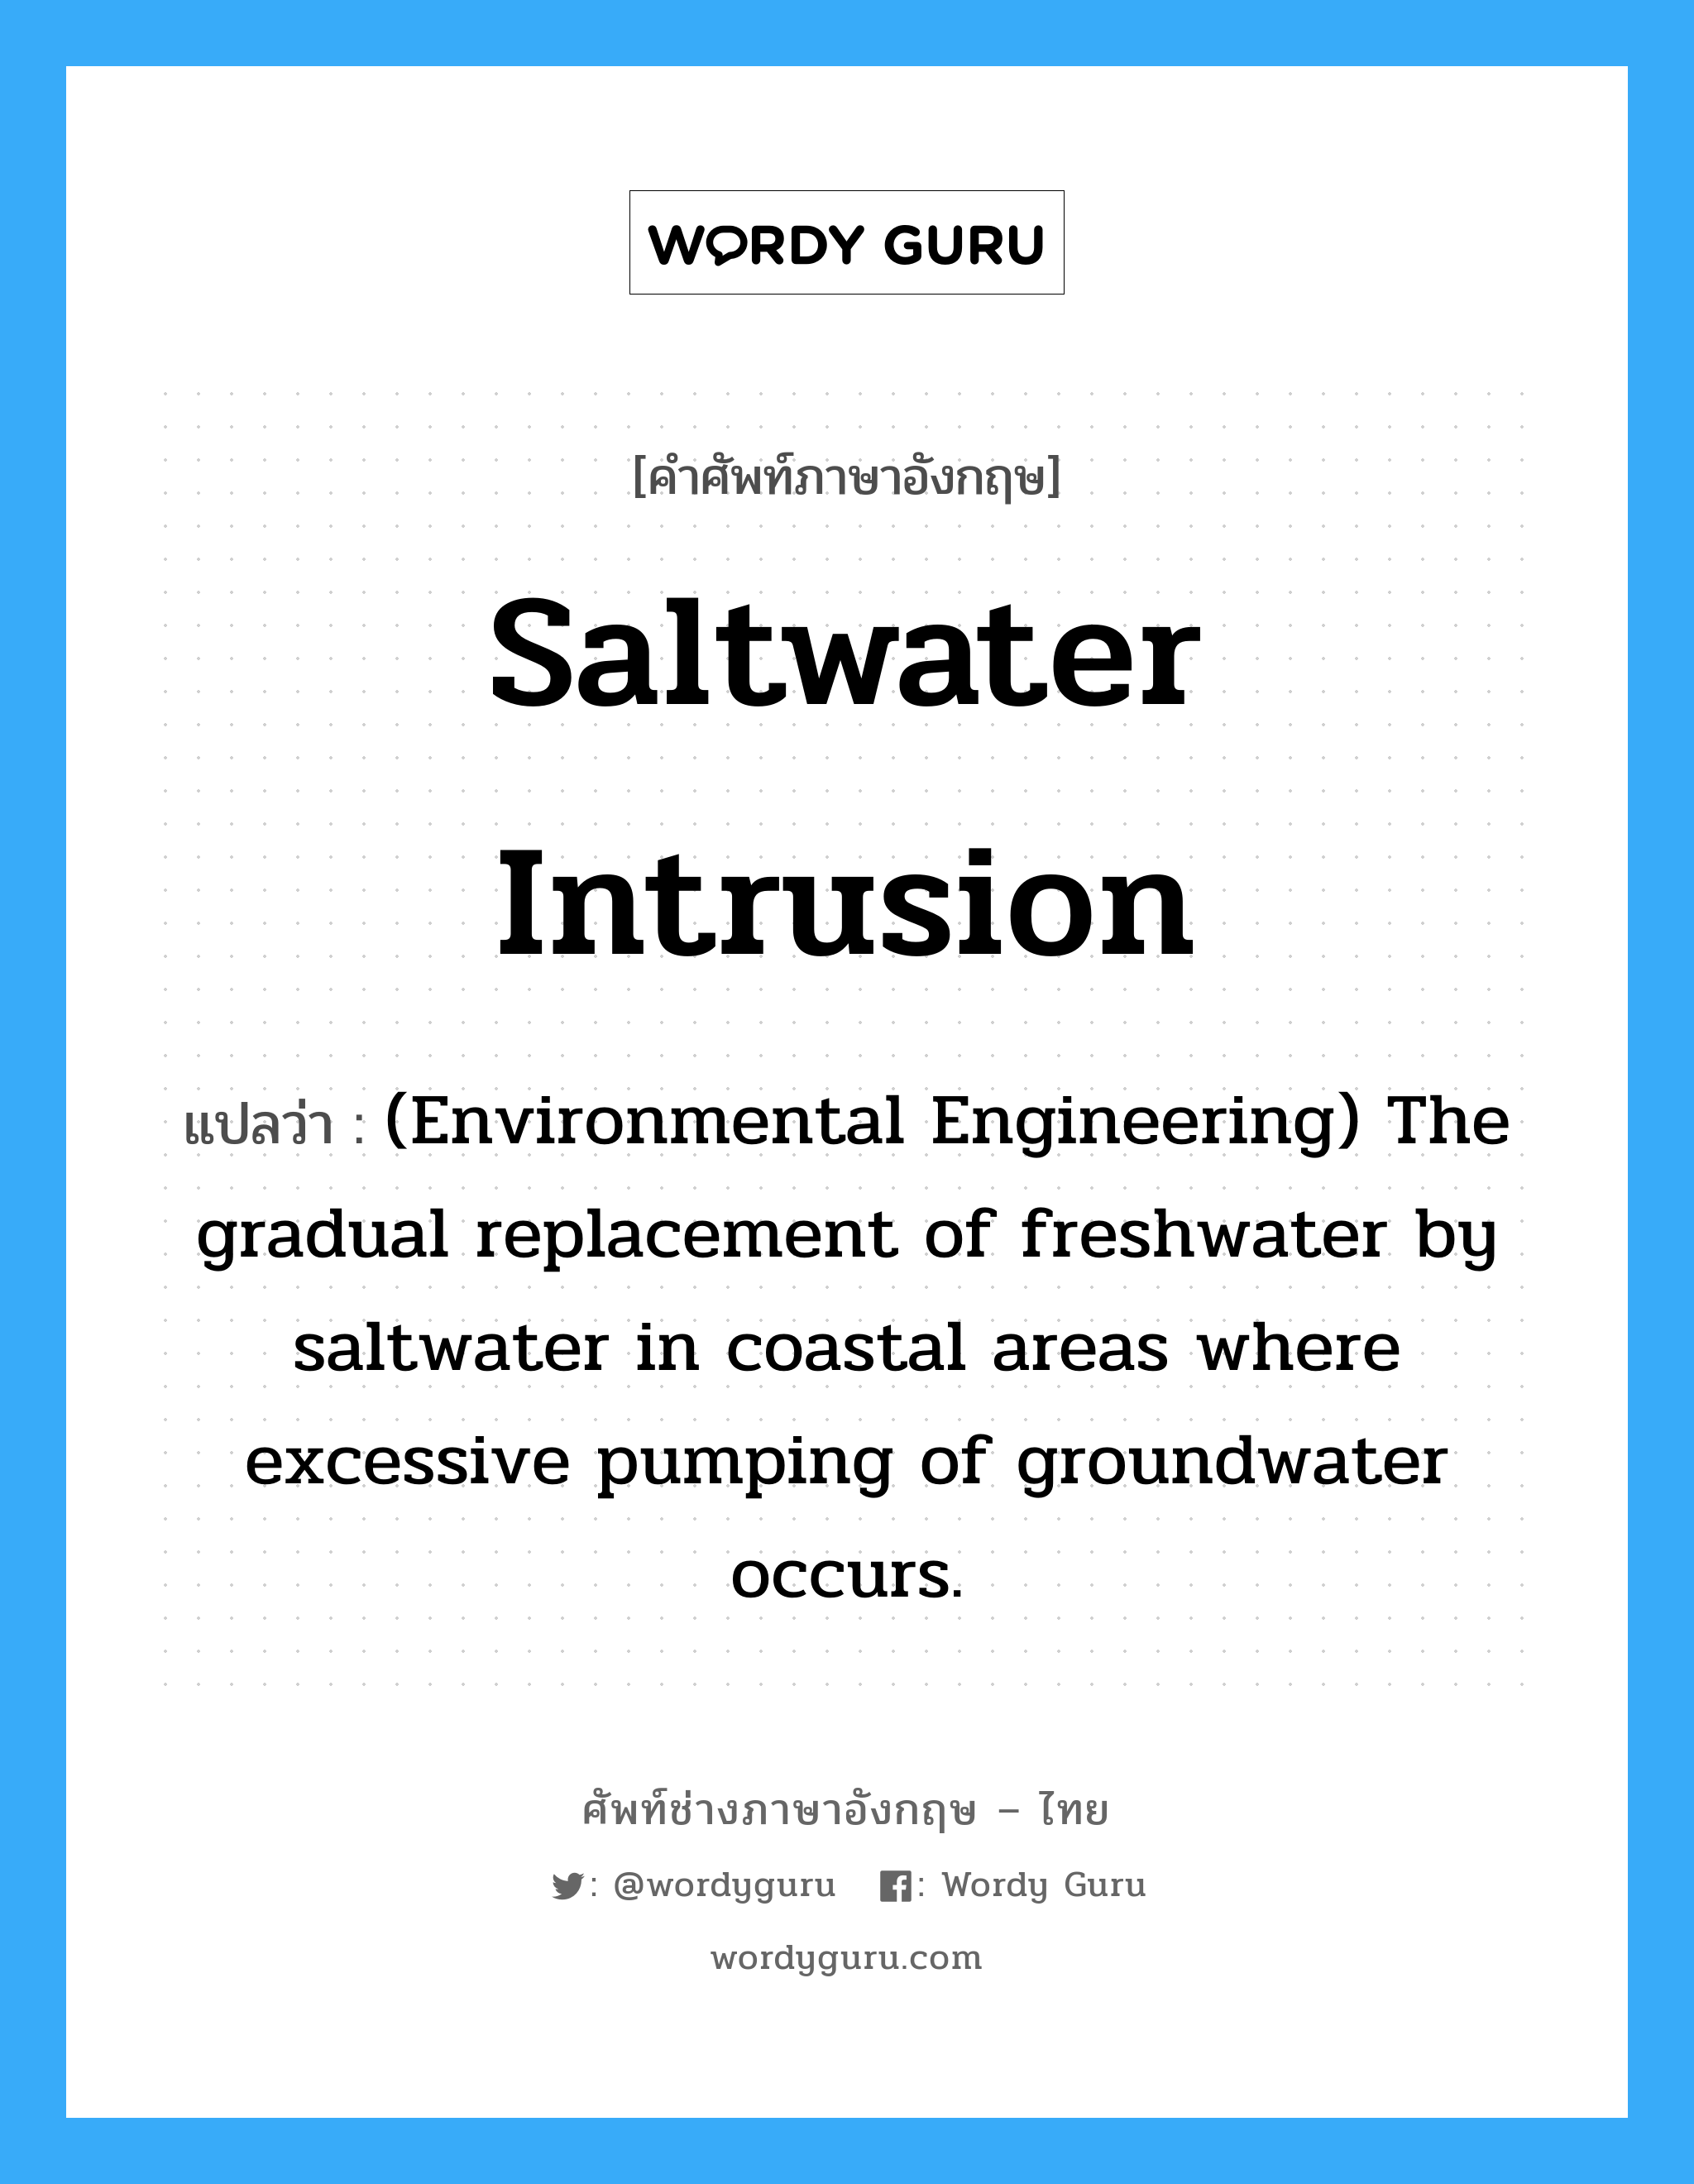 (Environmental Engineering) The gradual replacement of freshwater by saltwater in coastal areas where excessive pumping of groundwater occurs. ภาษาอังกฤษ?, คำศัพท์ช่างภาษาอังกฤษ - ไทย (Environmental Engineering) The gradual replacement of freshwater by saltwater in coastal areas where excessive pumping of groundwater occurs. คำศัพท์ภาษาอังกฤษ (Environmental Engineering) The gradual replacement of freshwater by saltwater in coastal areas where excessive pumping of groundwater occurs. แปลว่า Saltwater intrusion